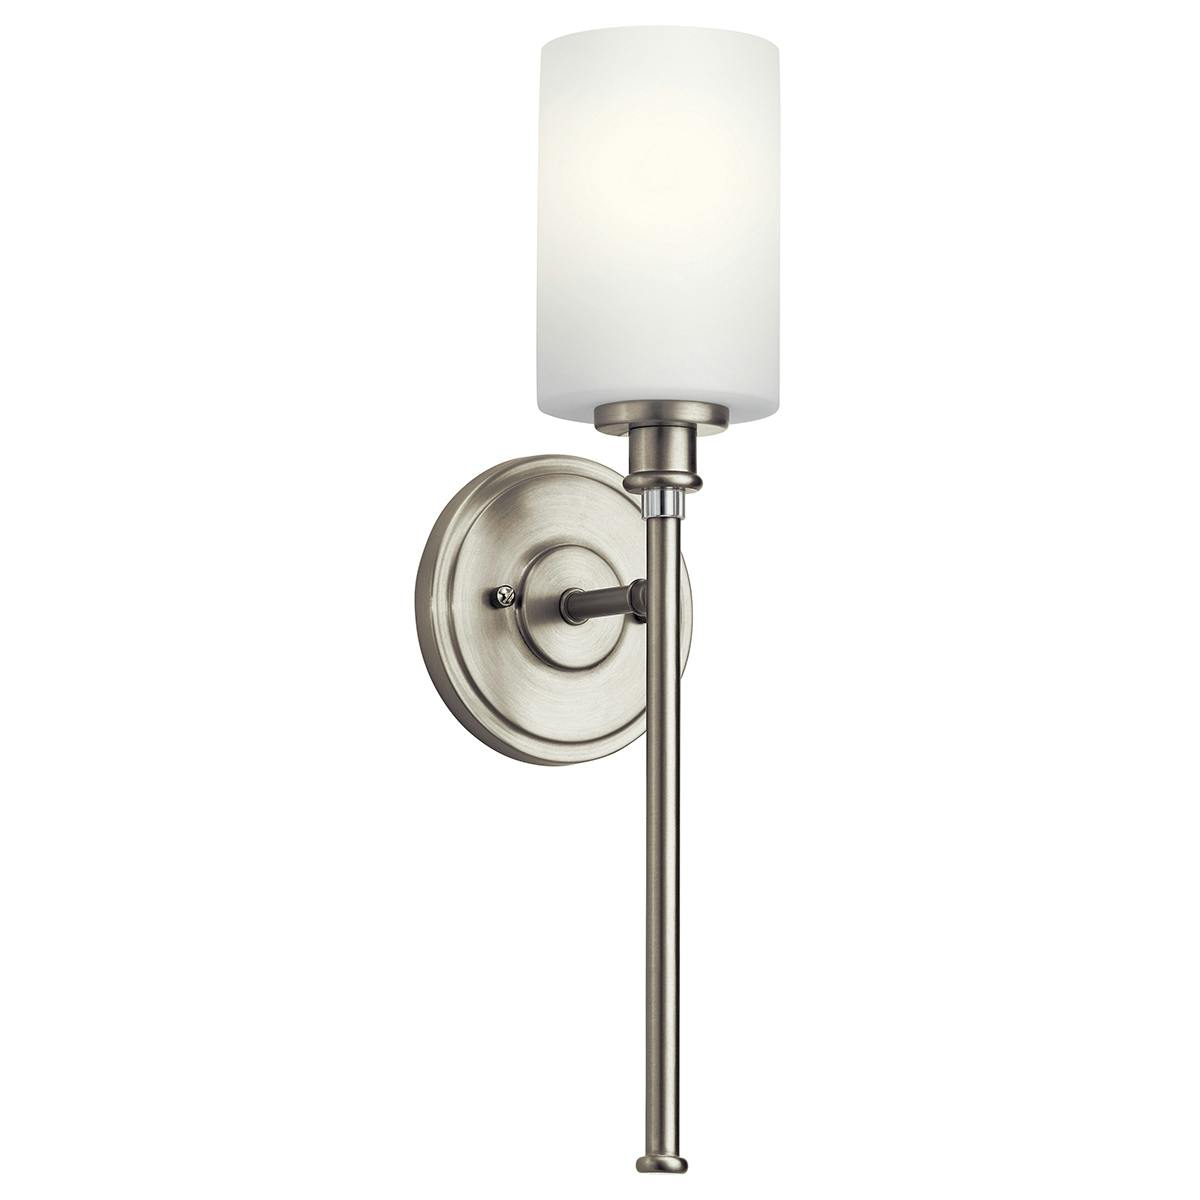 Joelson 1 Light Sconce w/ LED Bulb Nickel on a white background